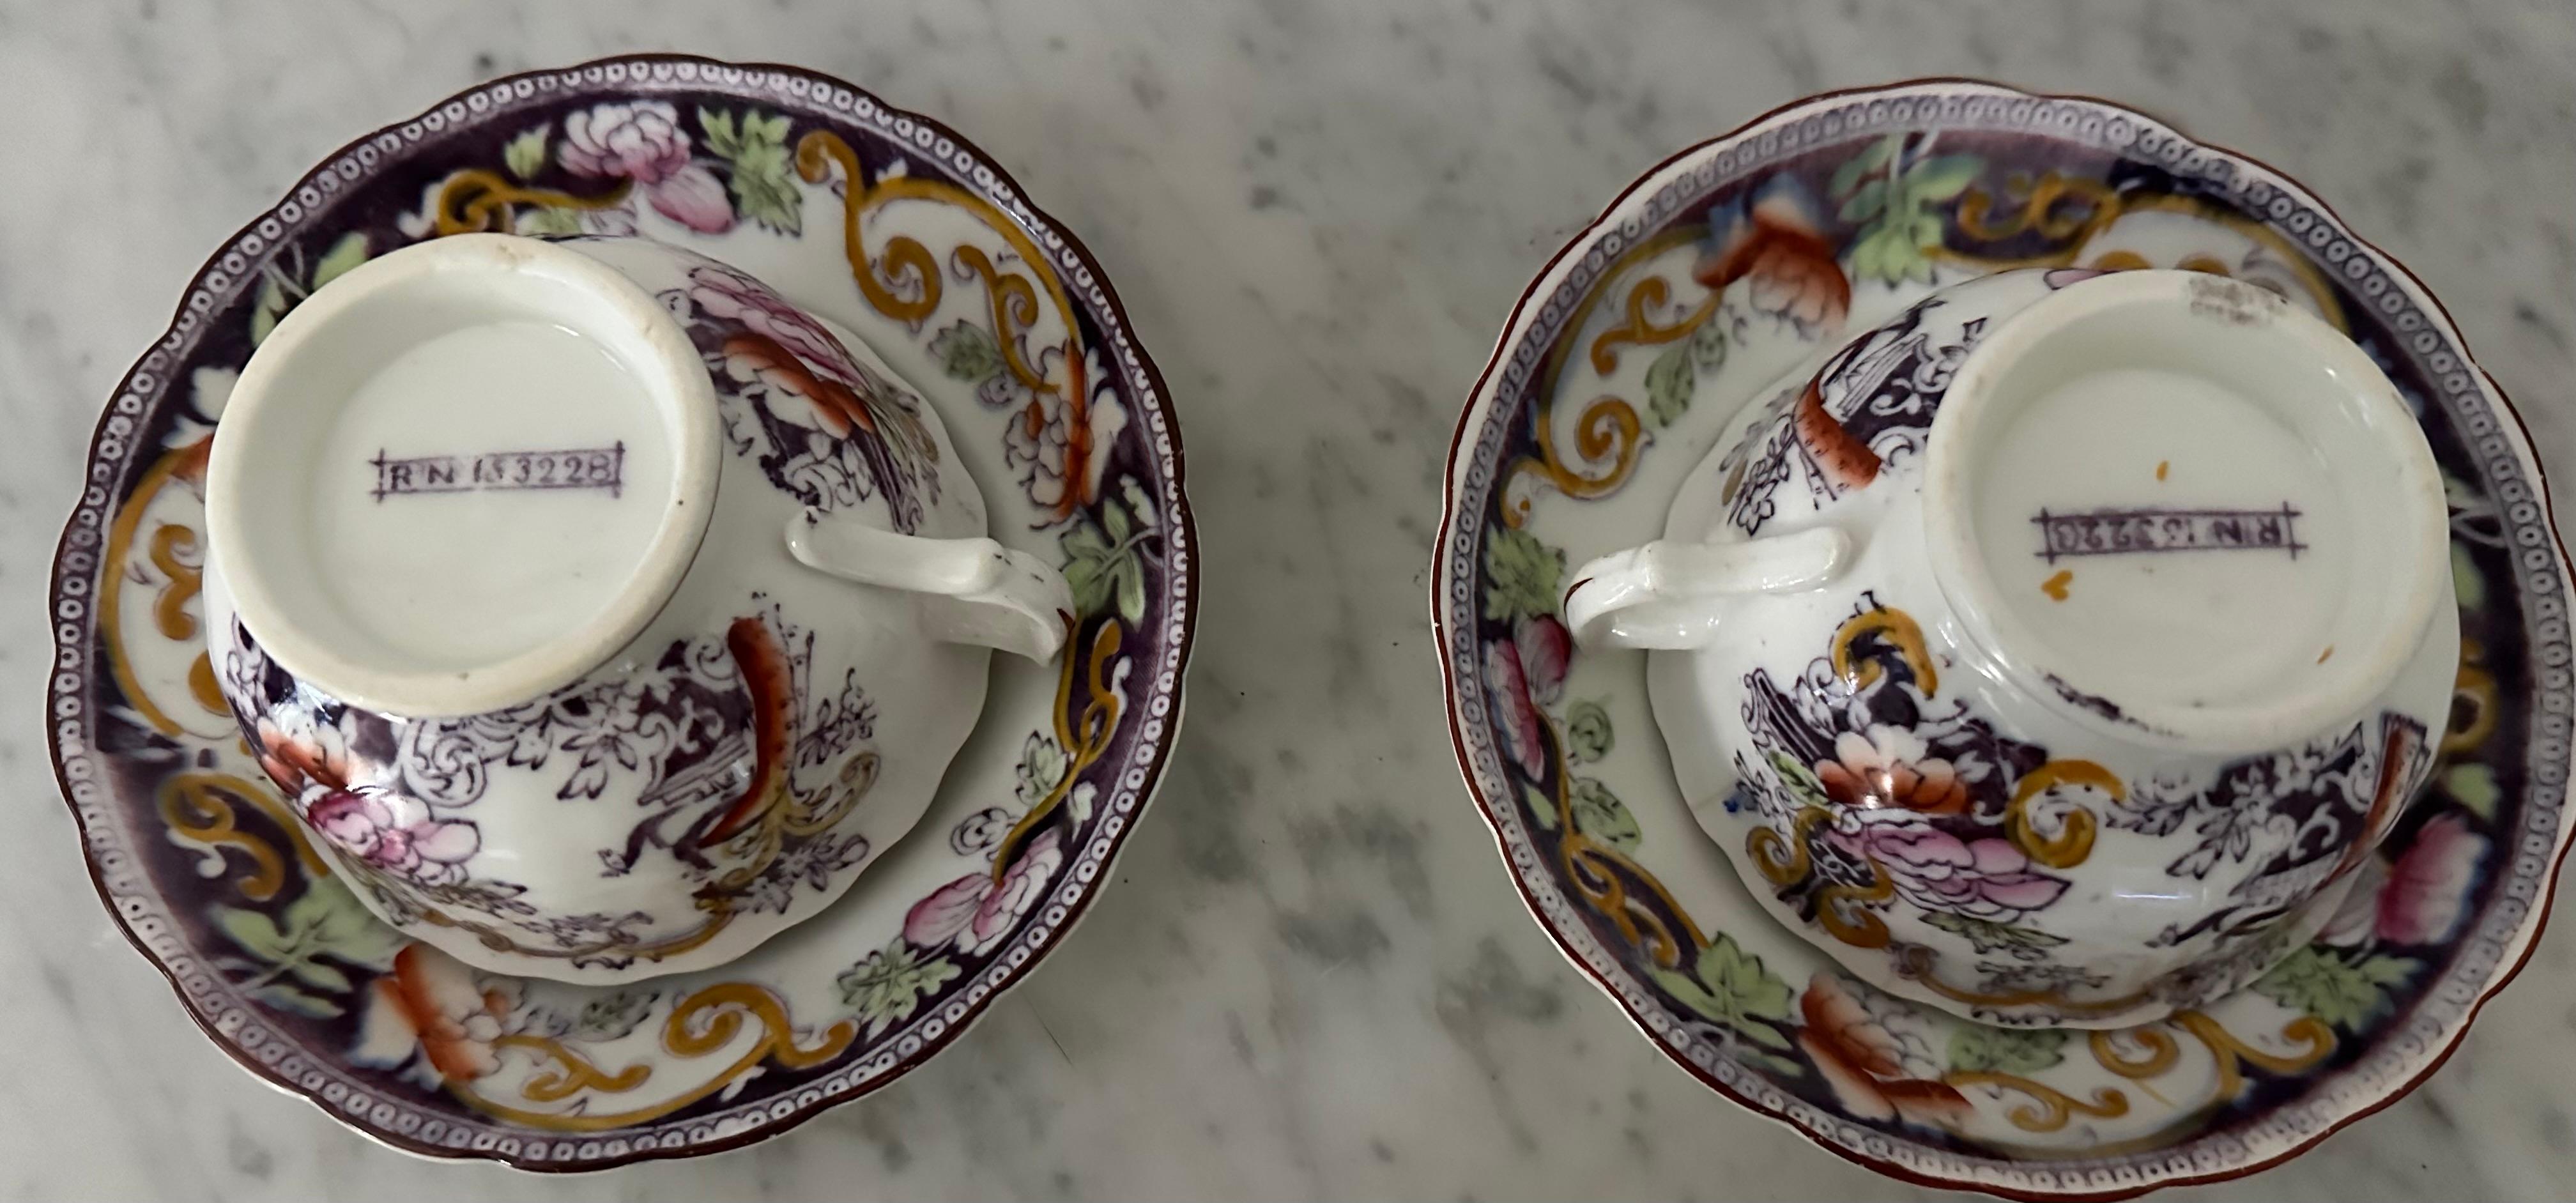 Pair of Antique 1890 English Bone China Tea Cup and Saucer Sets For Sale 4